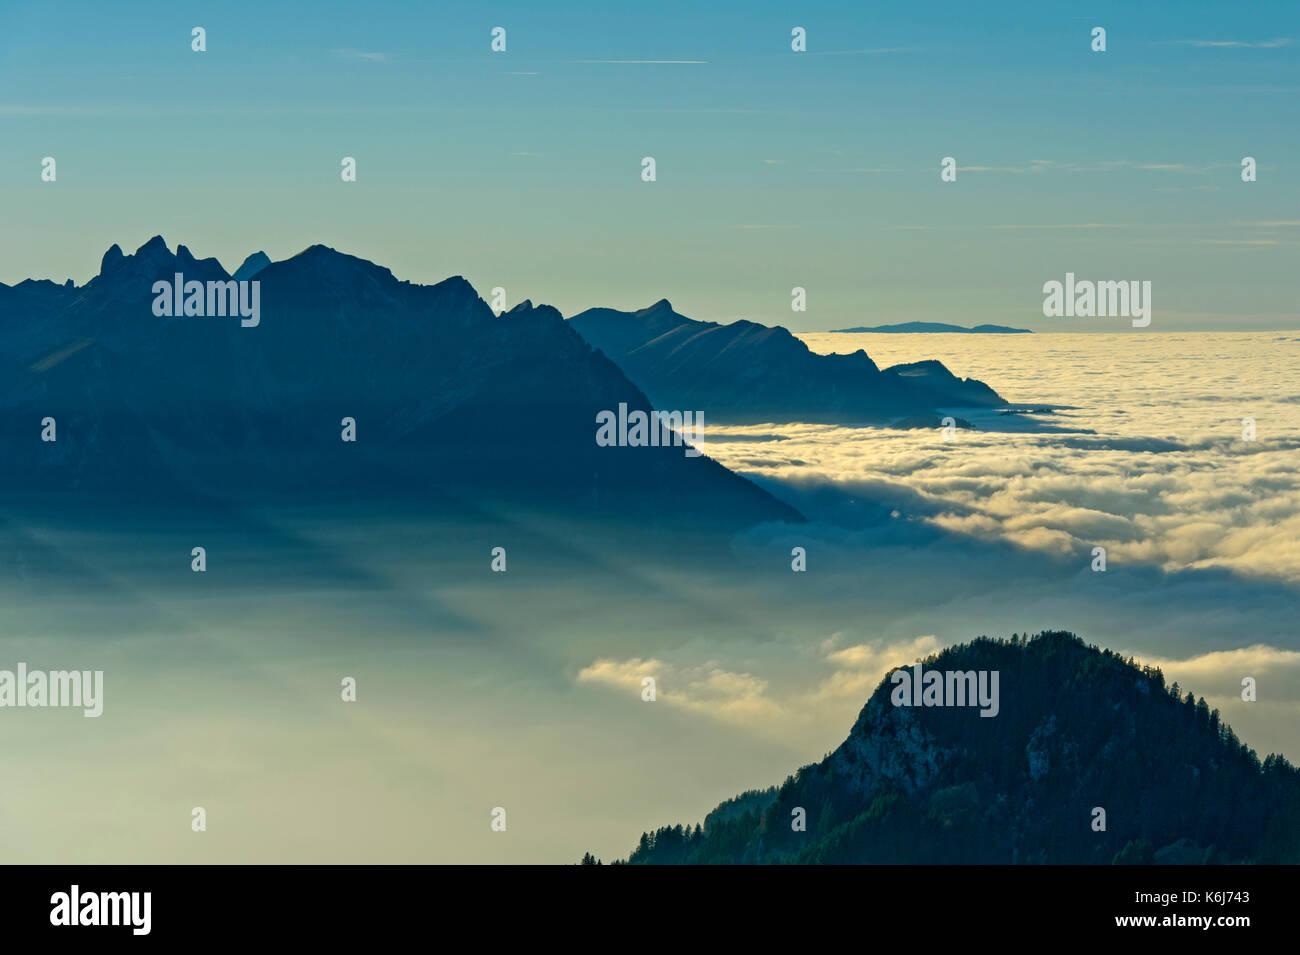 Lake Geneva at sunset under a thick layer of clouds, French Alps to the left, Leysin, Vaud, Switzerland Stock Photo